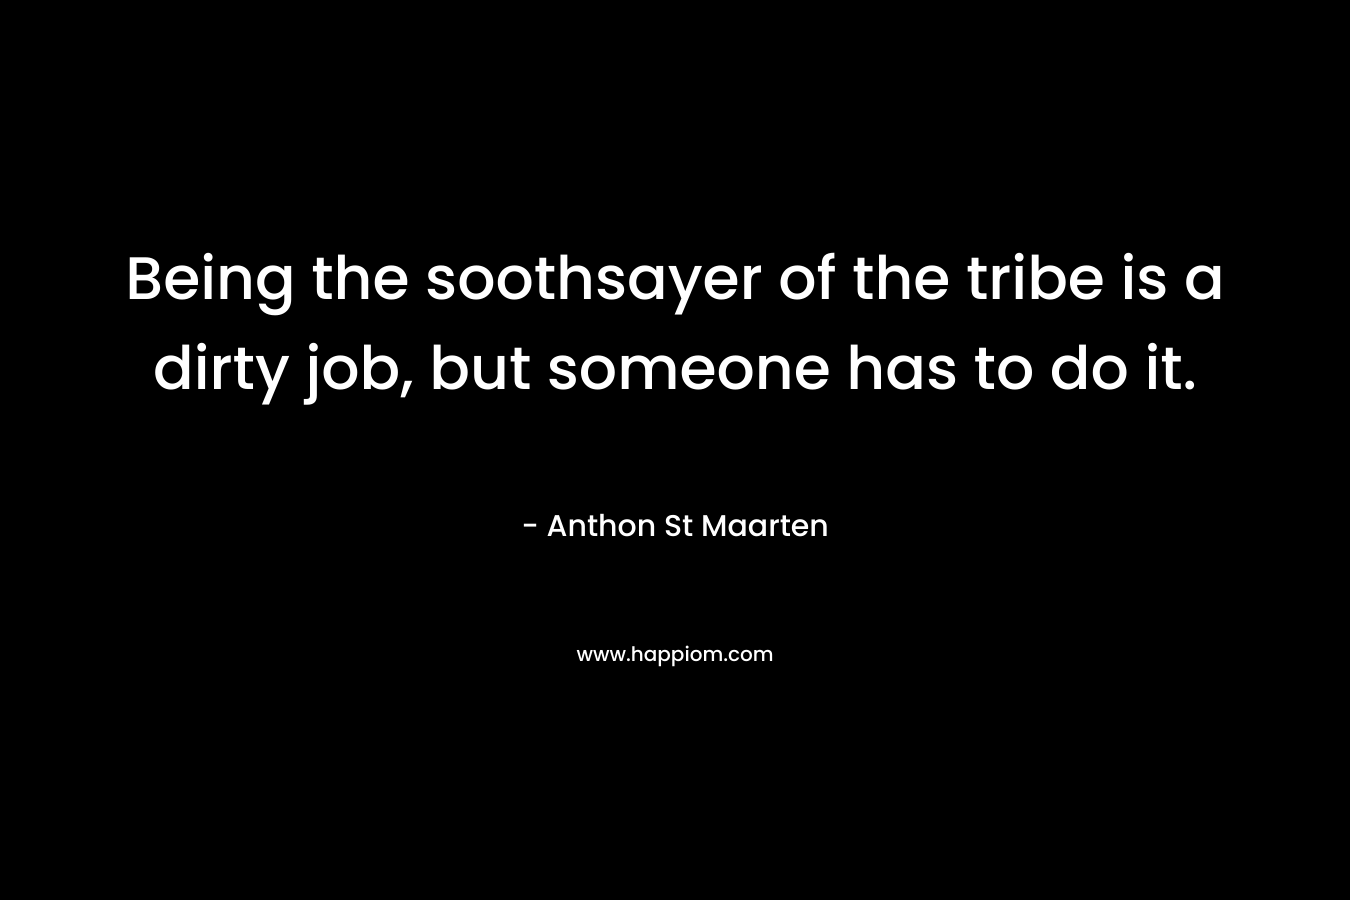 Being the soothsayer of the tribe is a dirty job, but someone has to do it. – Anthon St Maarten